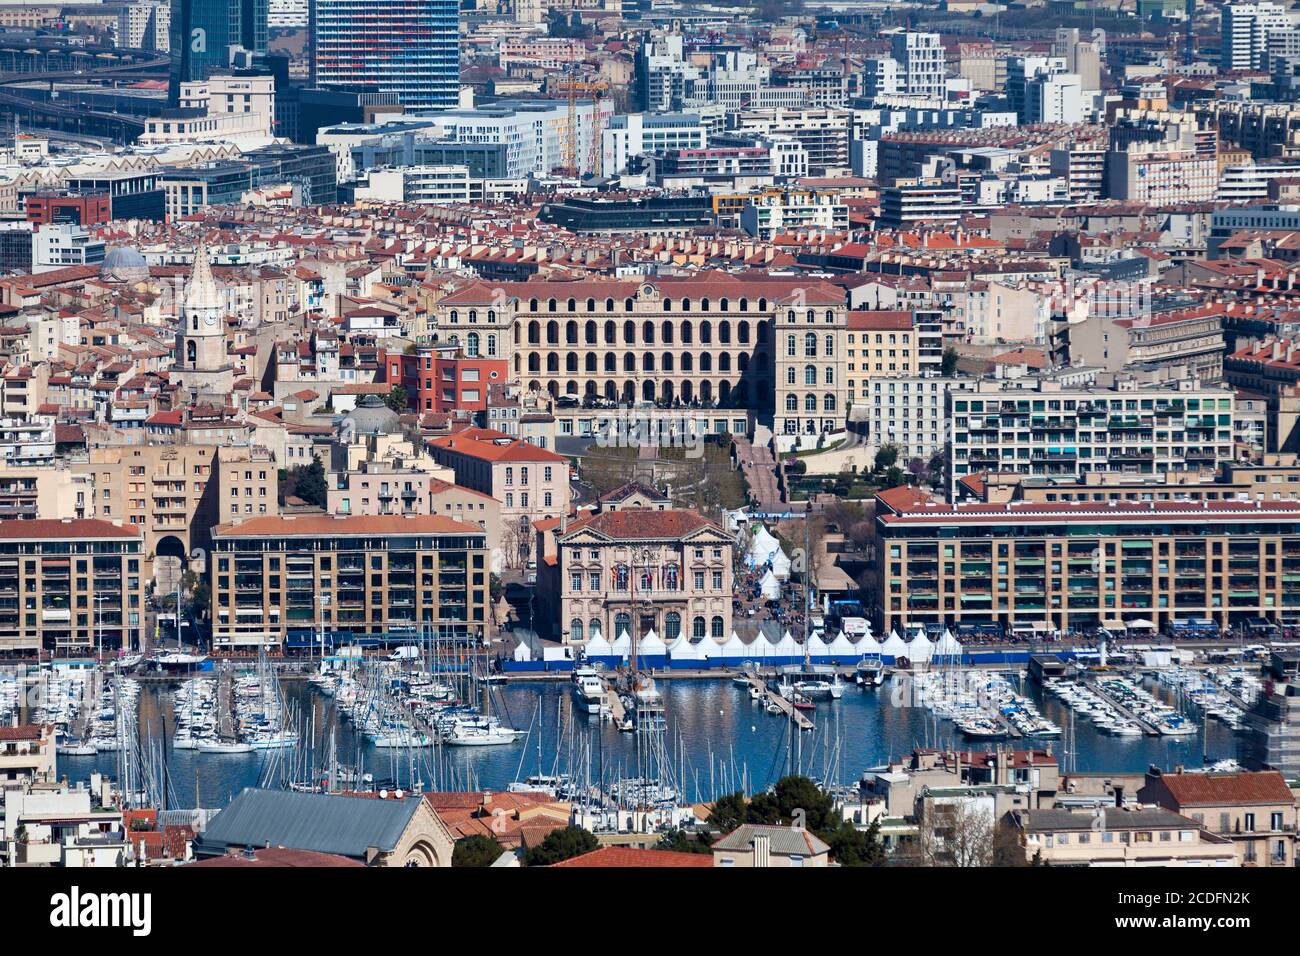 Marseille, France - March 23 2019: Aerial view of the Vieux Port with the Mairie de Marseille (English: City Hall), the Église des Accoules (English: Stock Photo